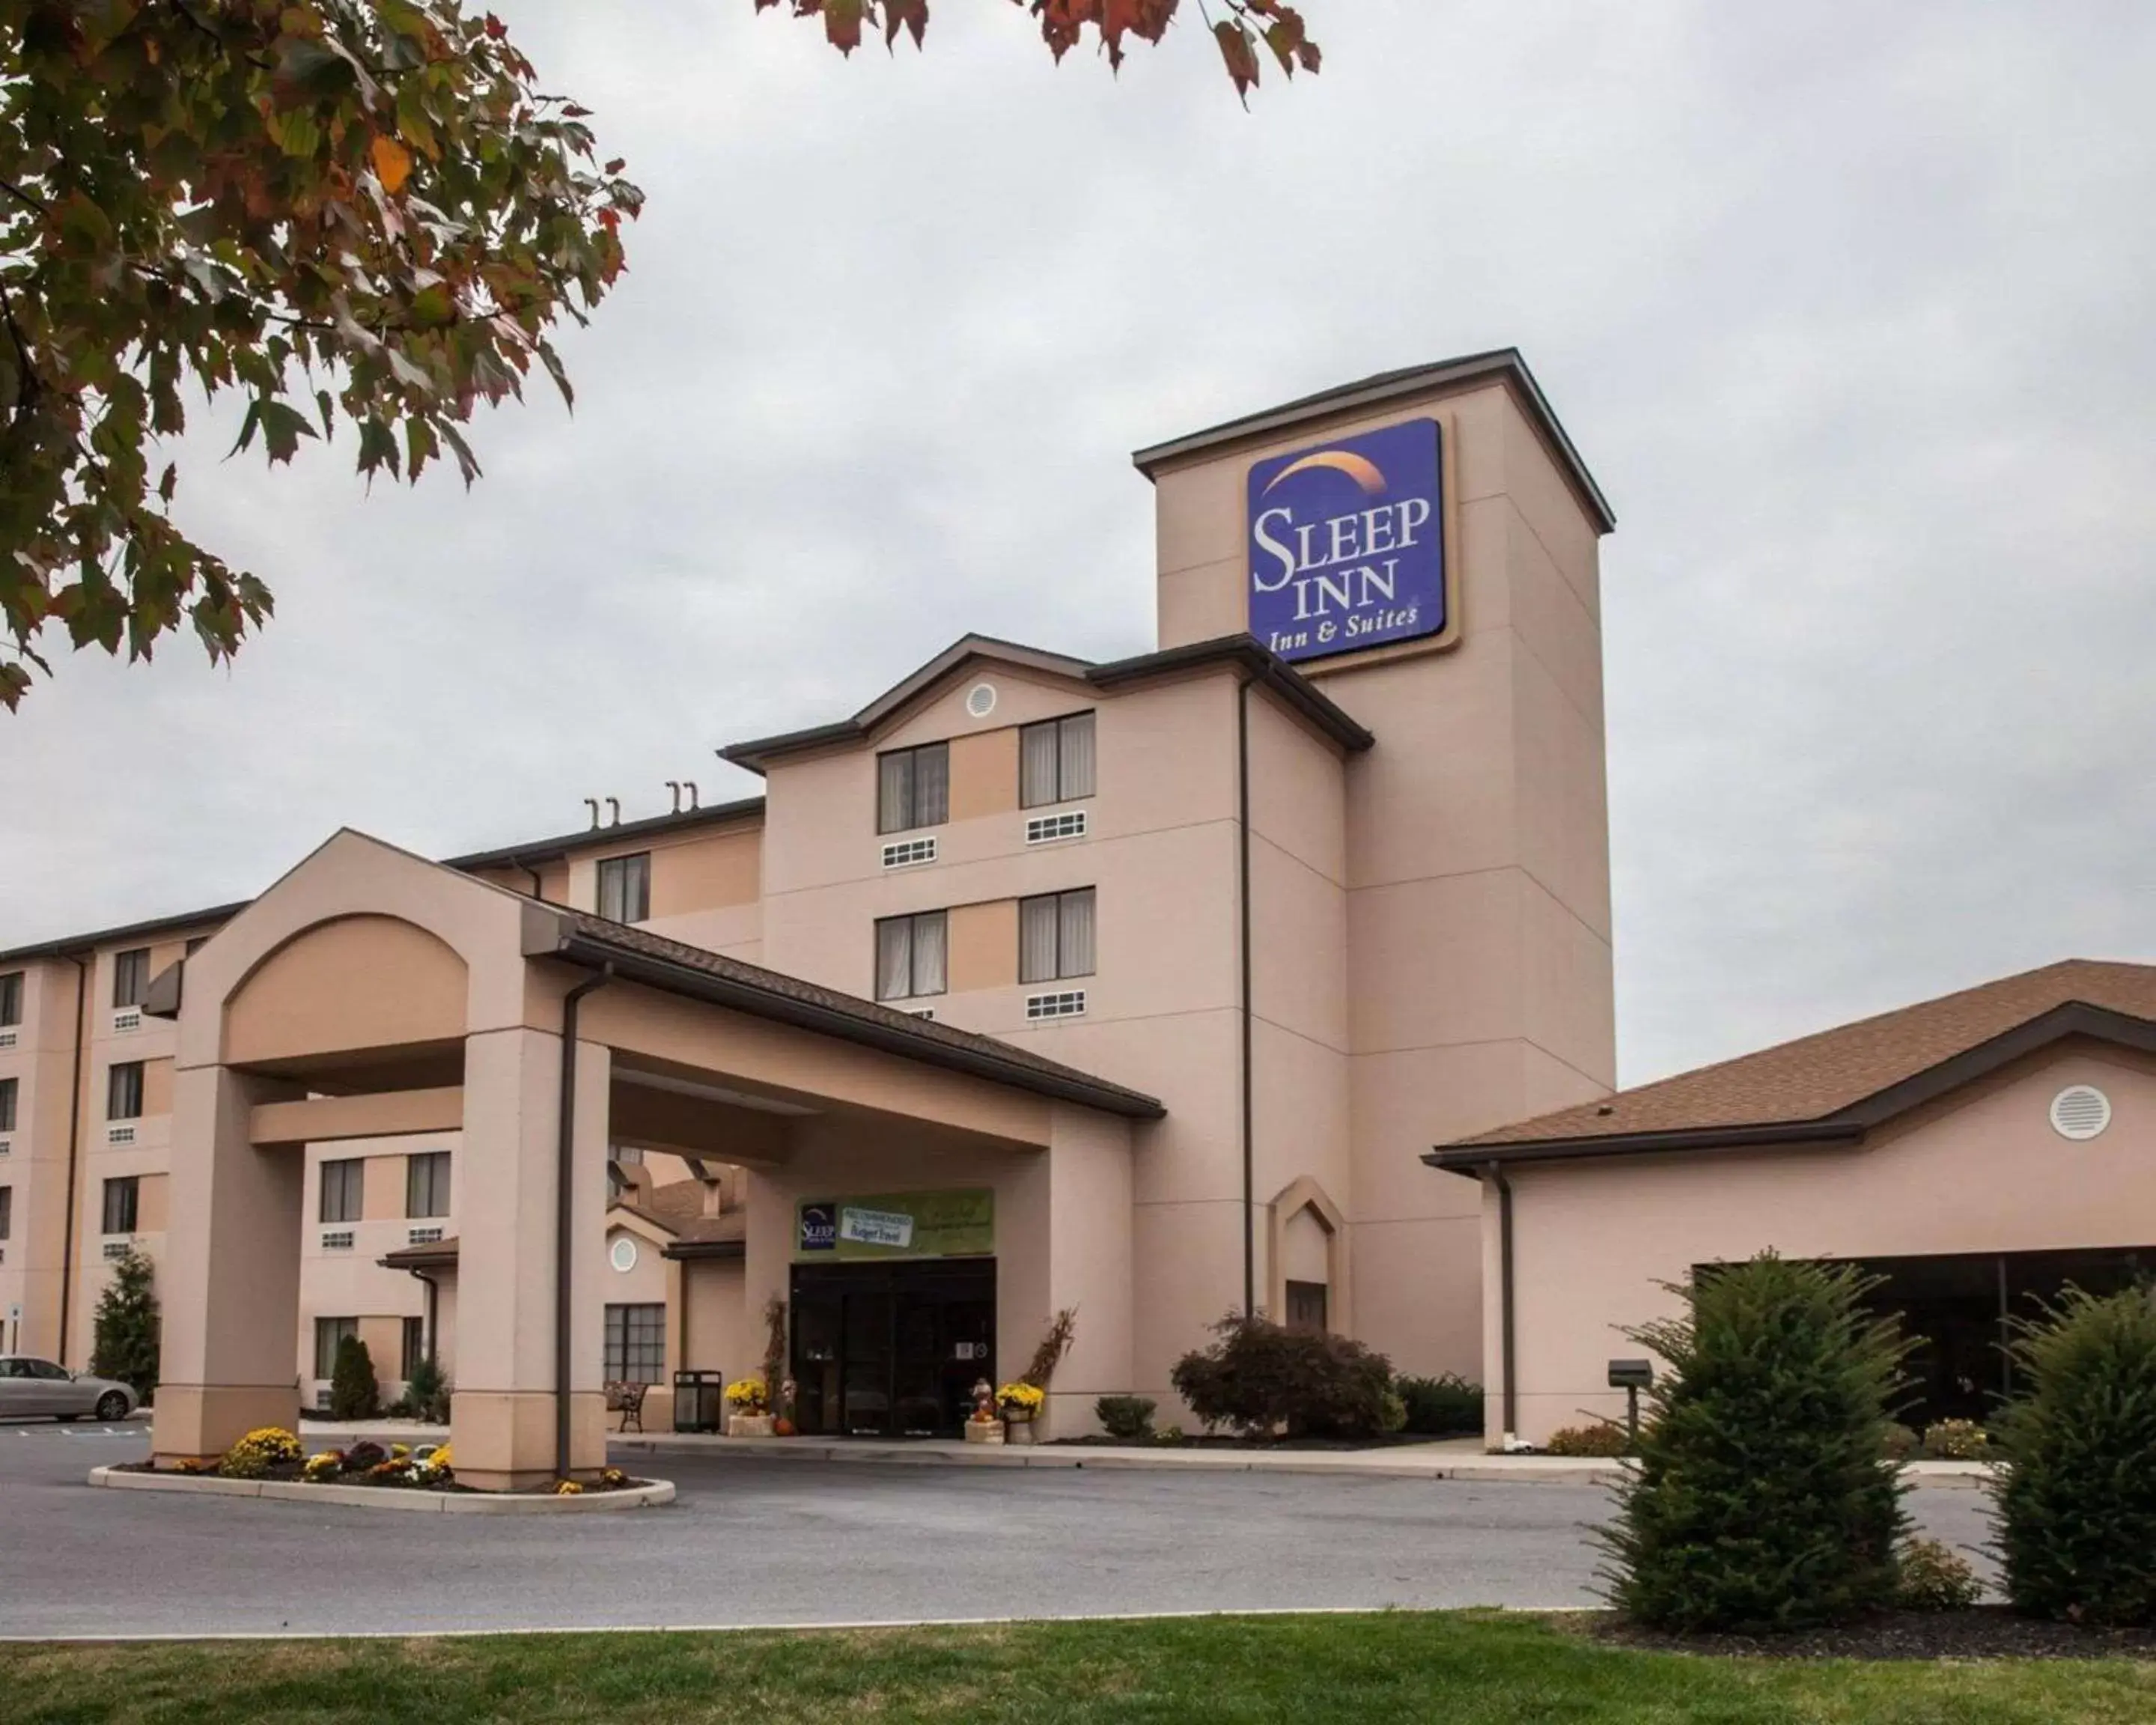 Property building in Sleep Inn and Suites Hagerstown